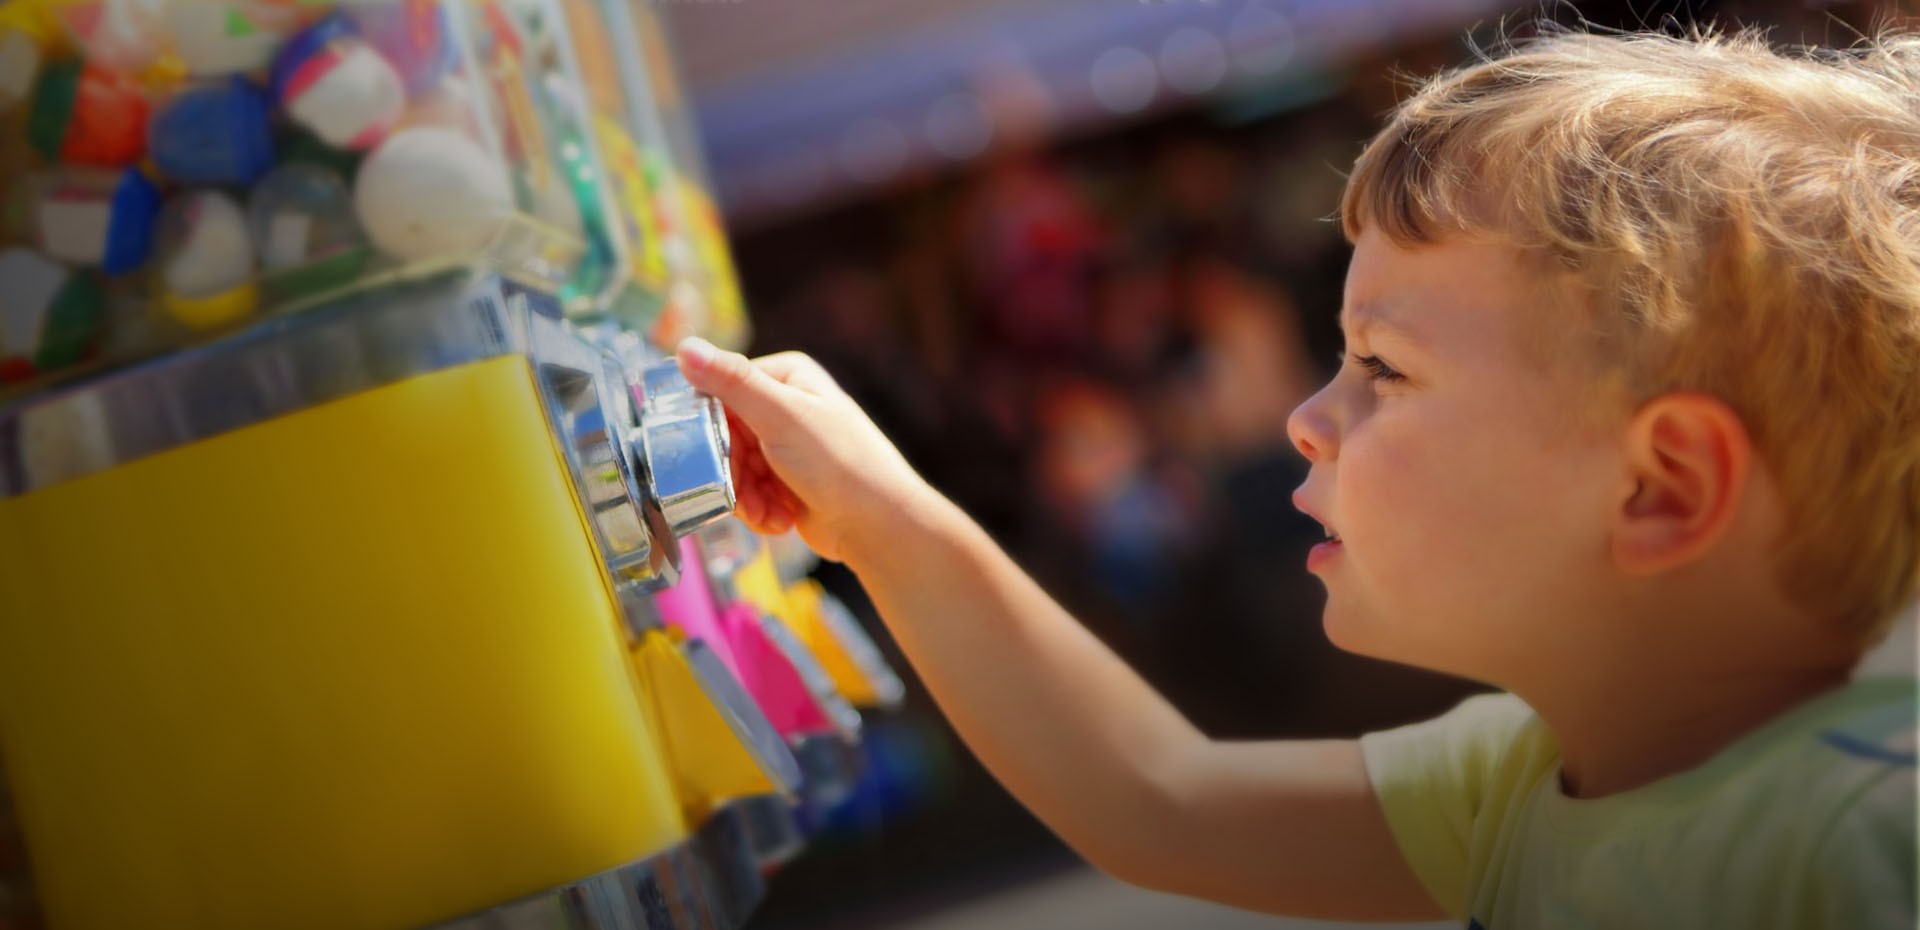 Installers Of Toys Vending Machines For Pubs Hinkley